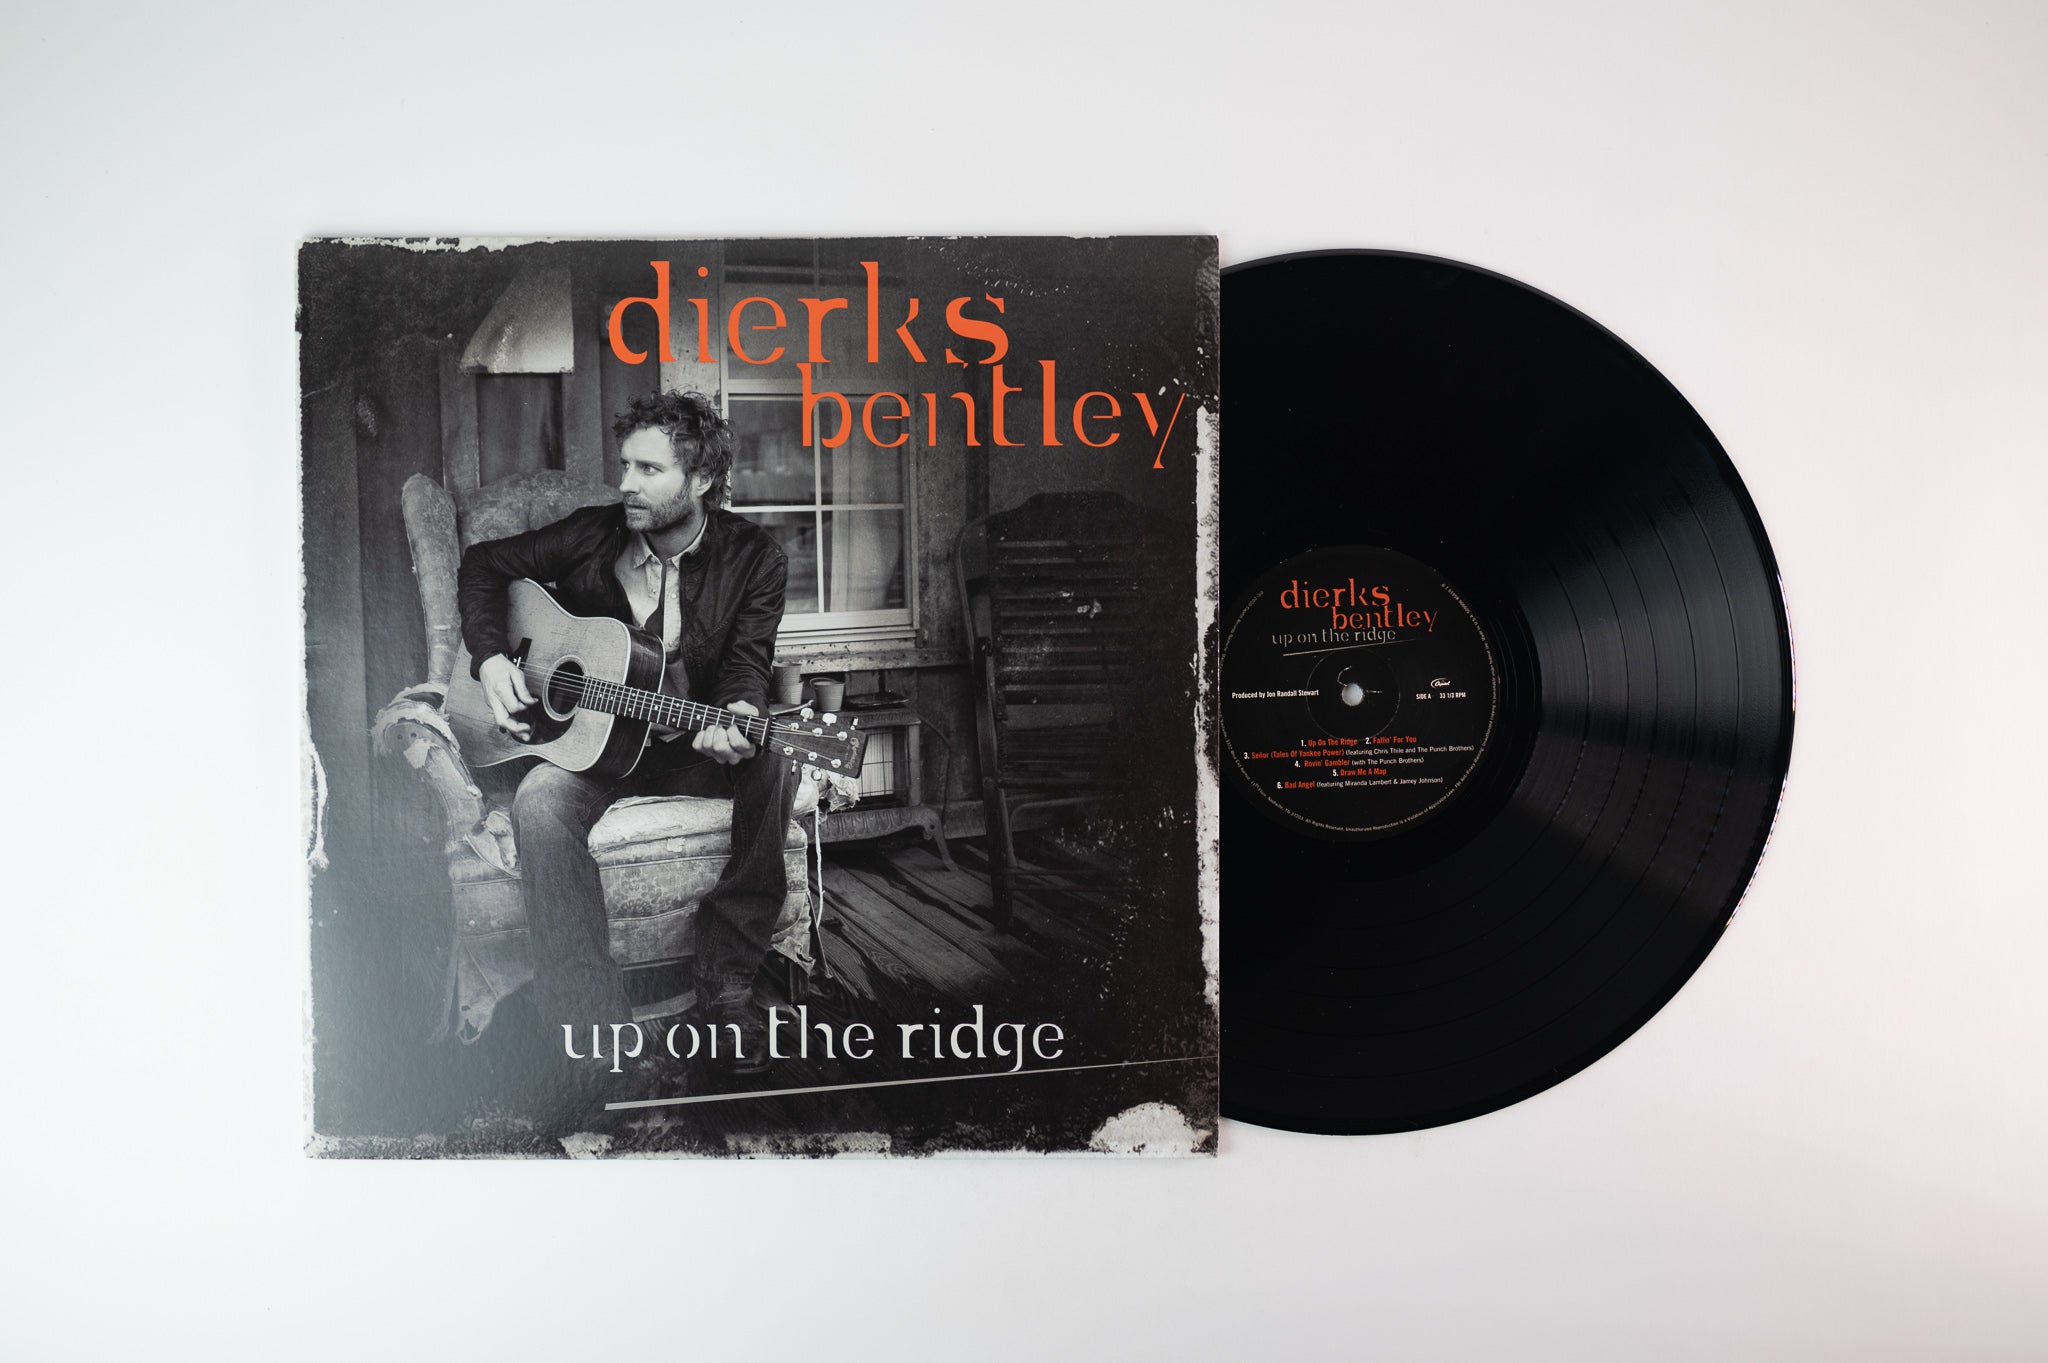 Dierks Bentley - Up On The Ridge on Capitol Records Nashville